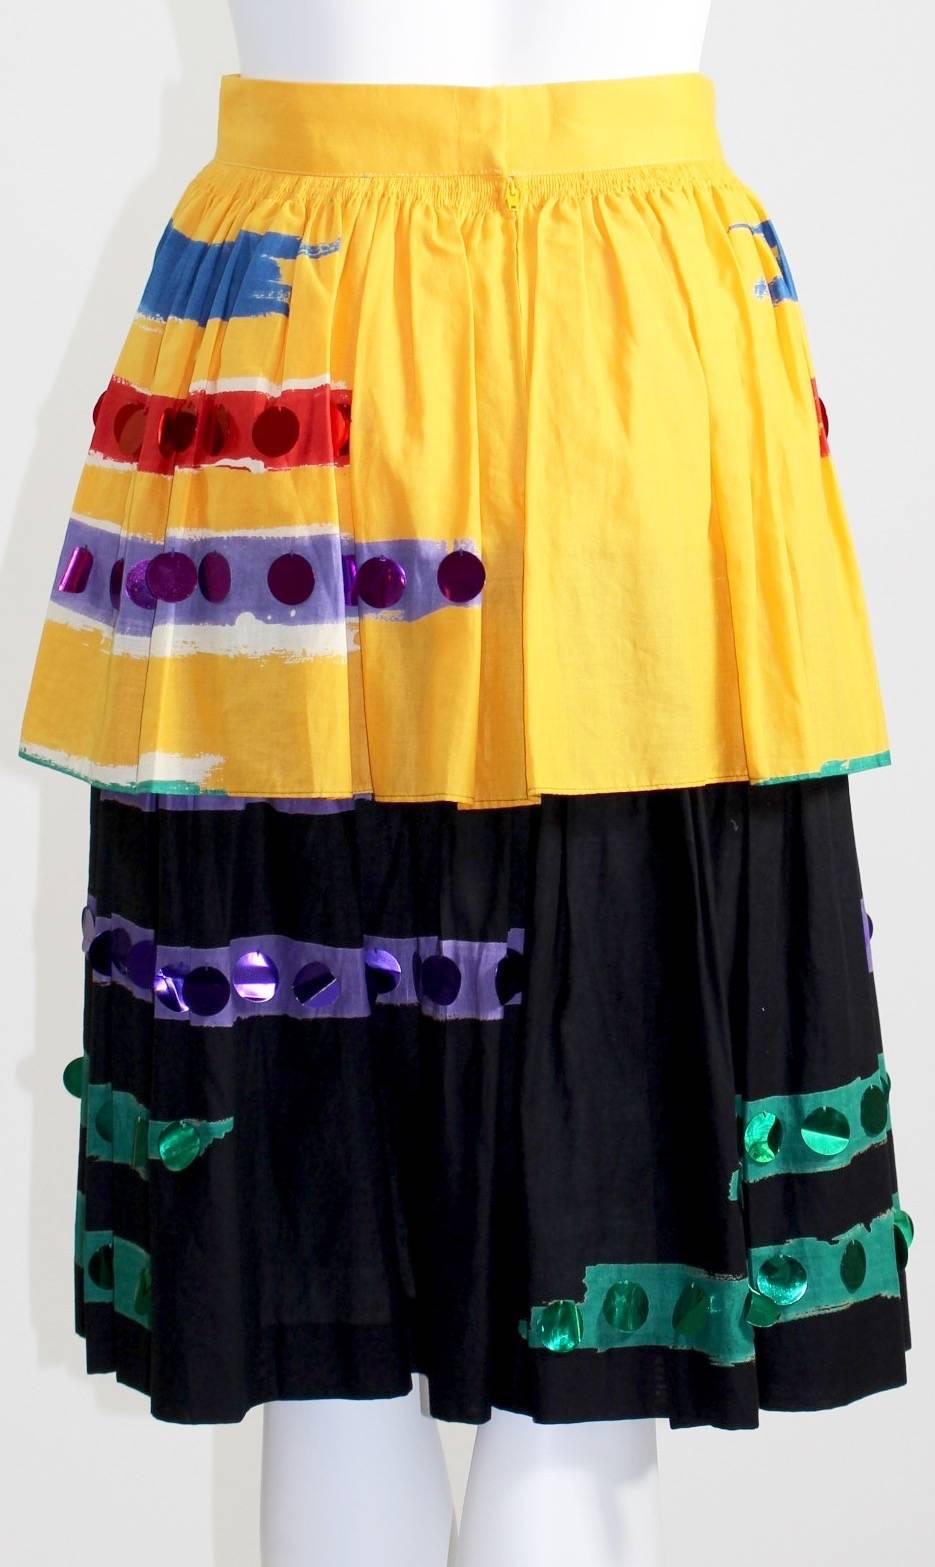  1980s Michaele Vollbrach Colorful Cotton Layered Gypsy Pheasant Skirt  For Sale 3